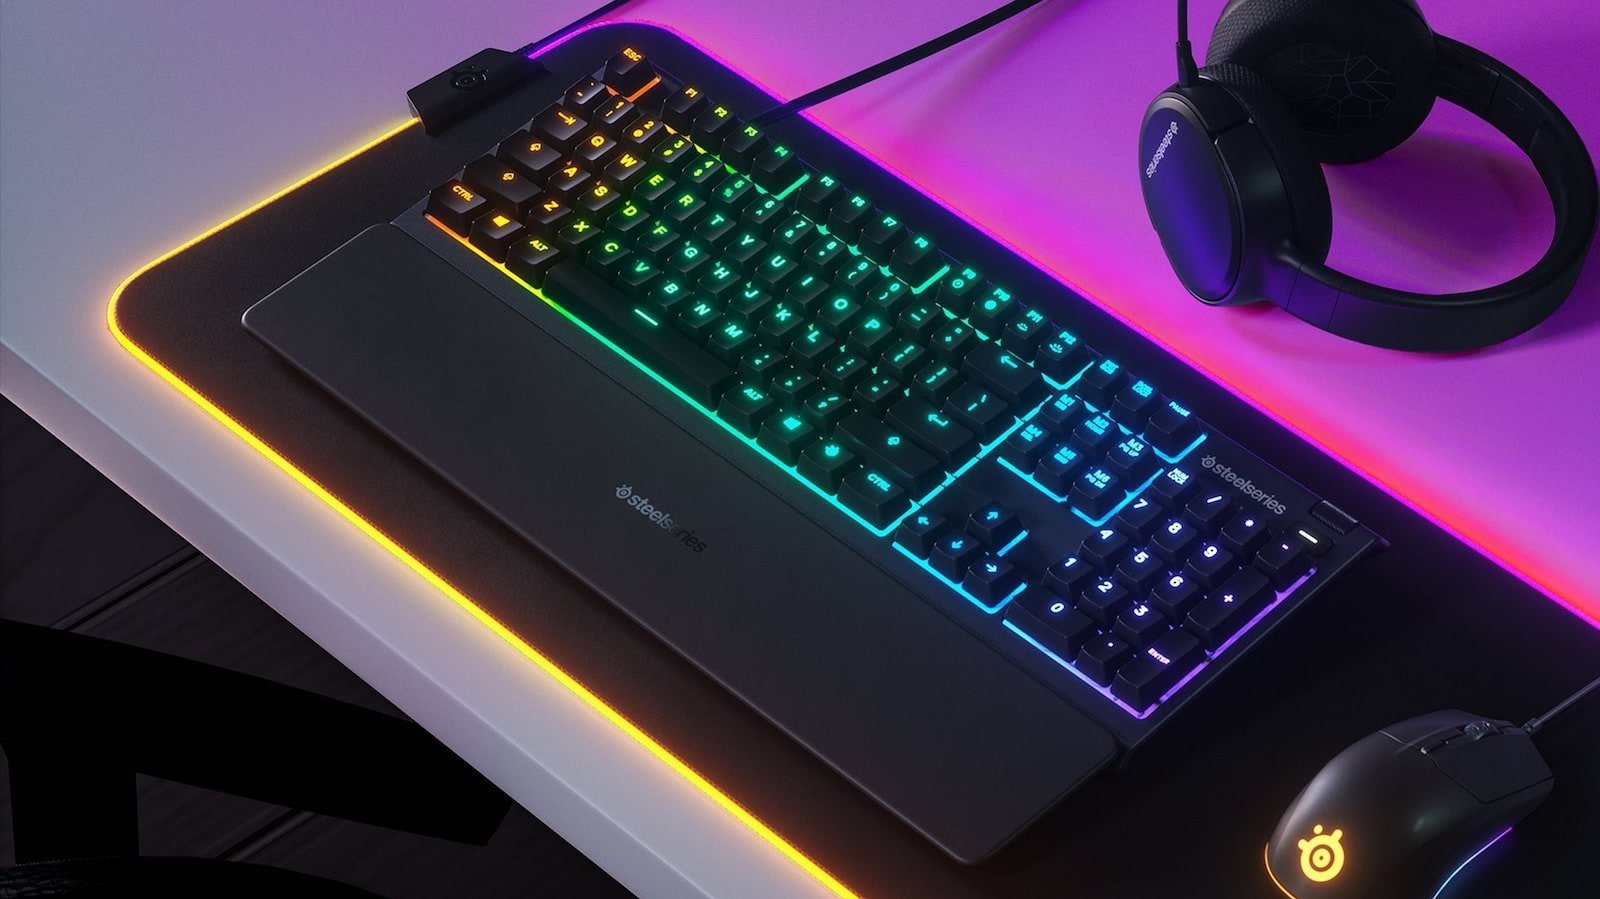 SteelSeries Apex 3 keyboard lets you personalize the illumination to match your style